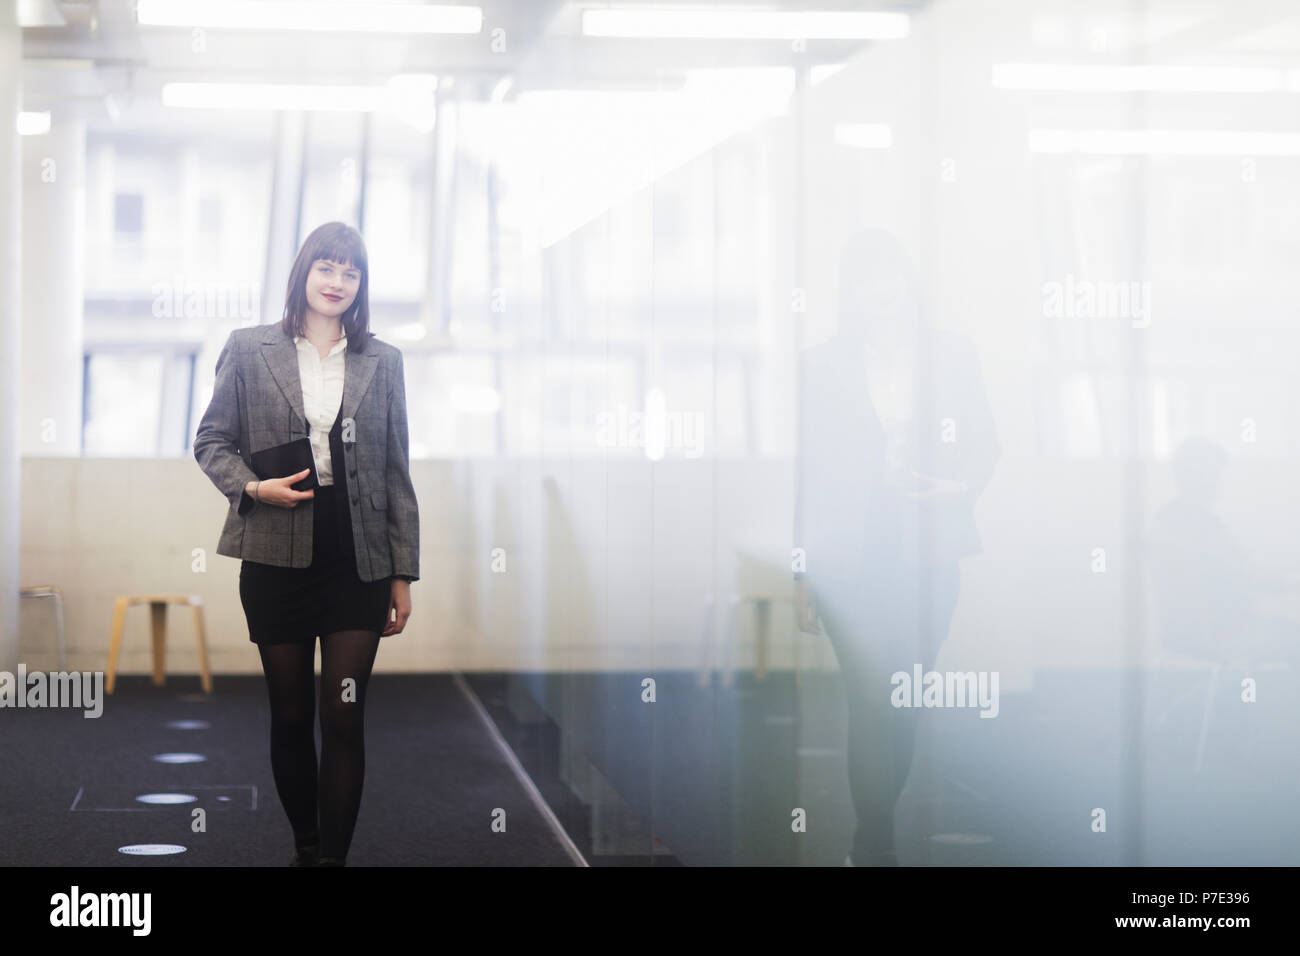 Businesswoman in office holding digital tablet Stock Photo